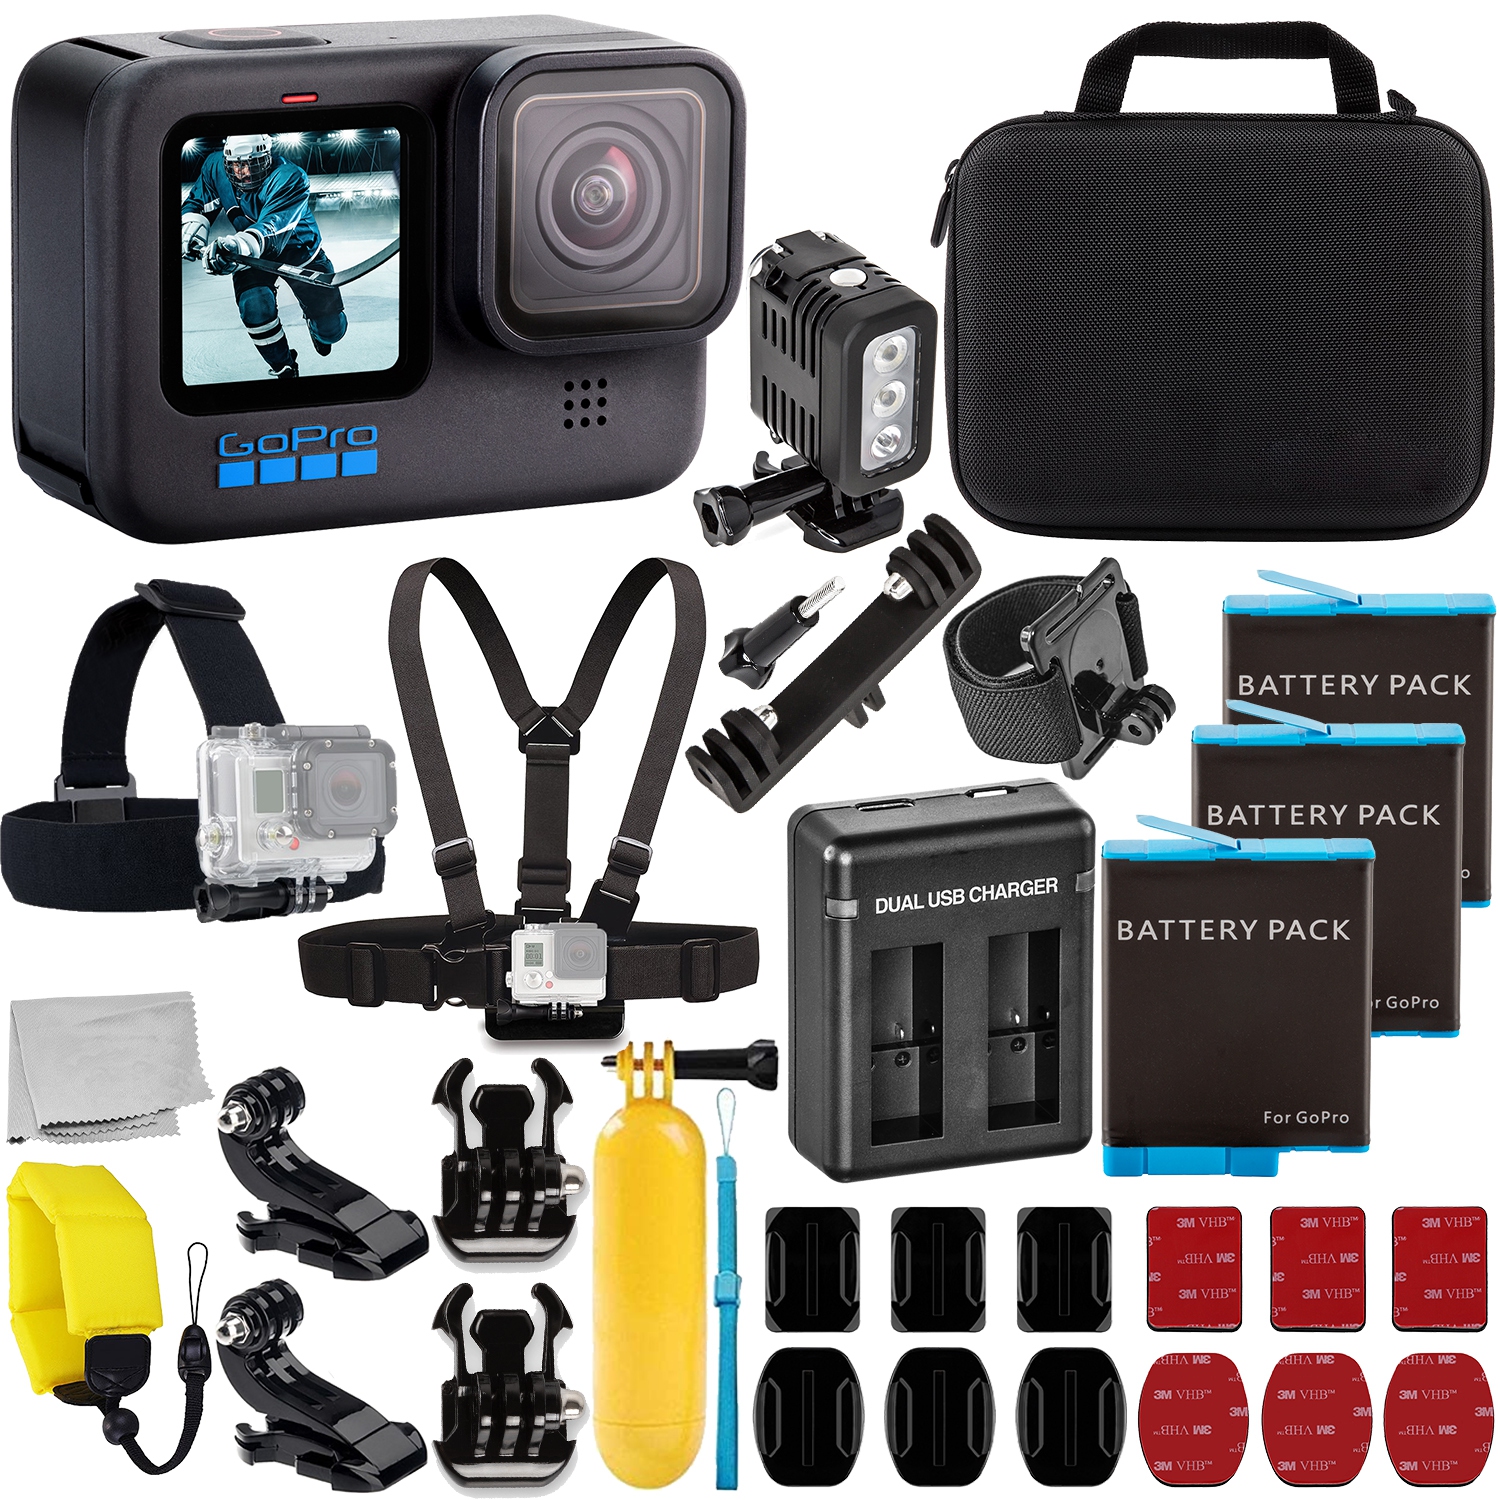 GoPro HERO10 (Hero 10) Black with Deluxe Accessory Bundle: 3x Replacement Batteries, Dual USB Charger, Underwater LED Light with Bracket, Water Resistant Action Camera Case, & Much More